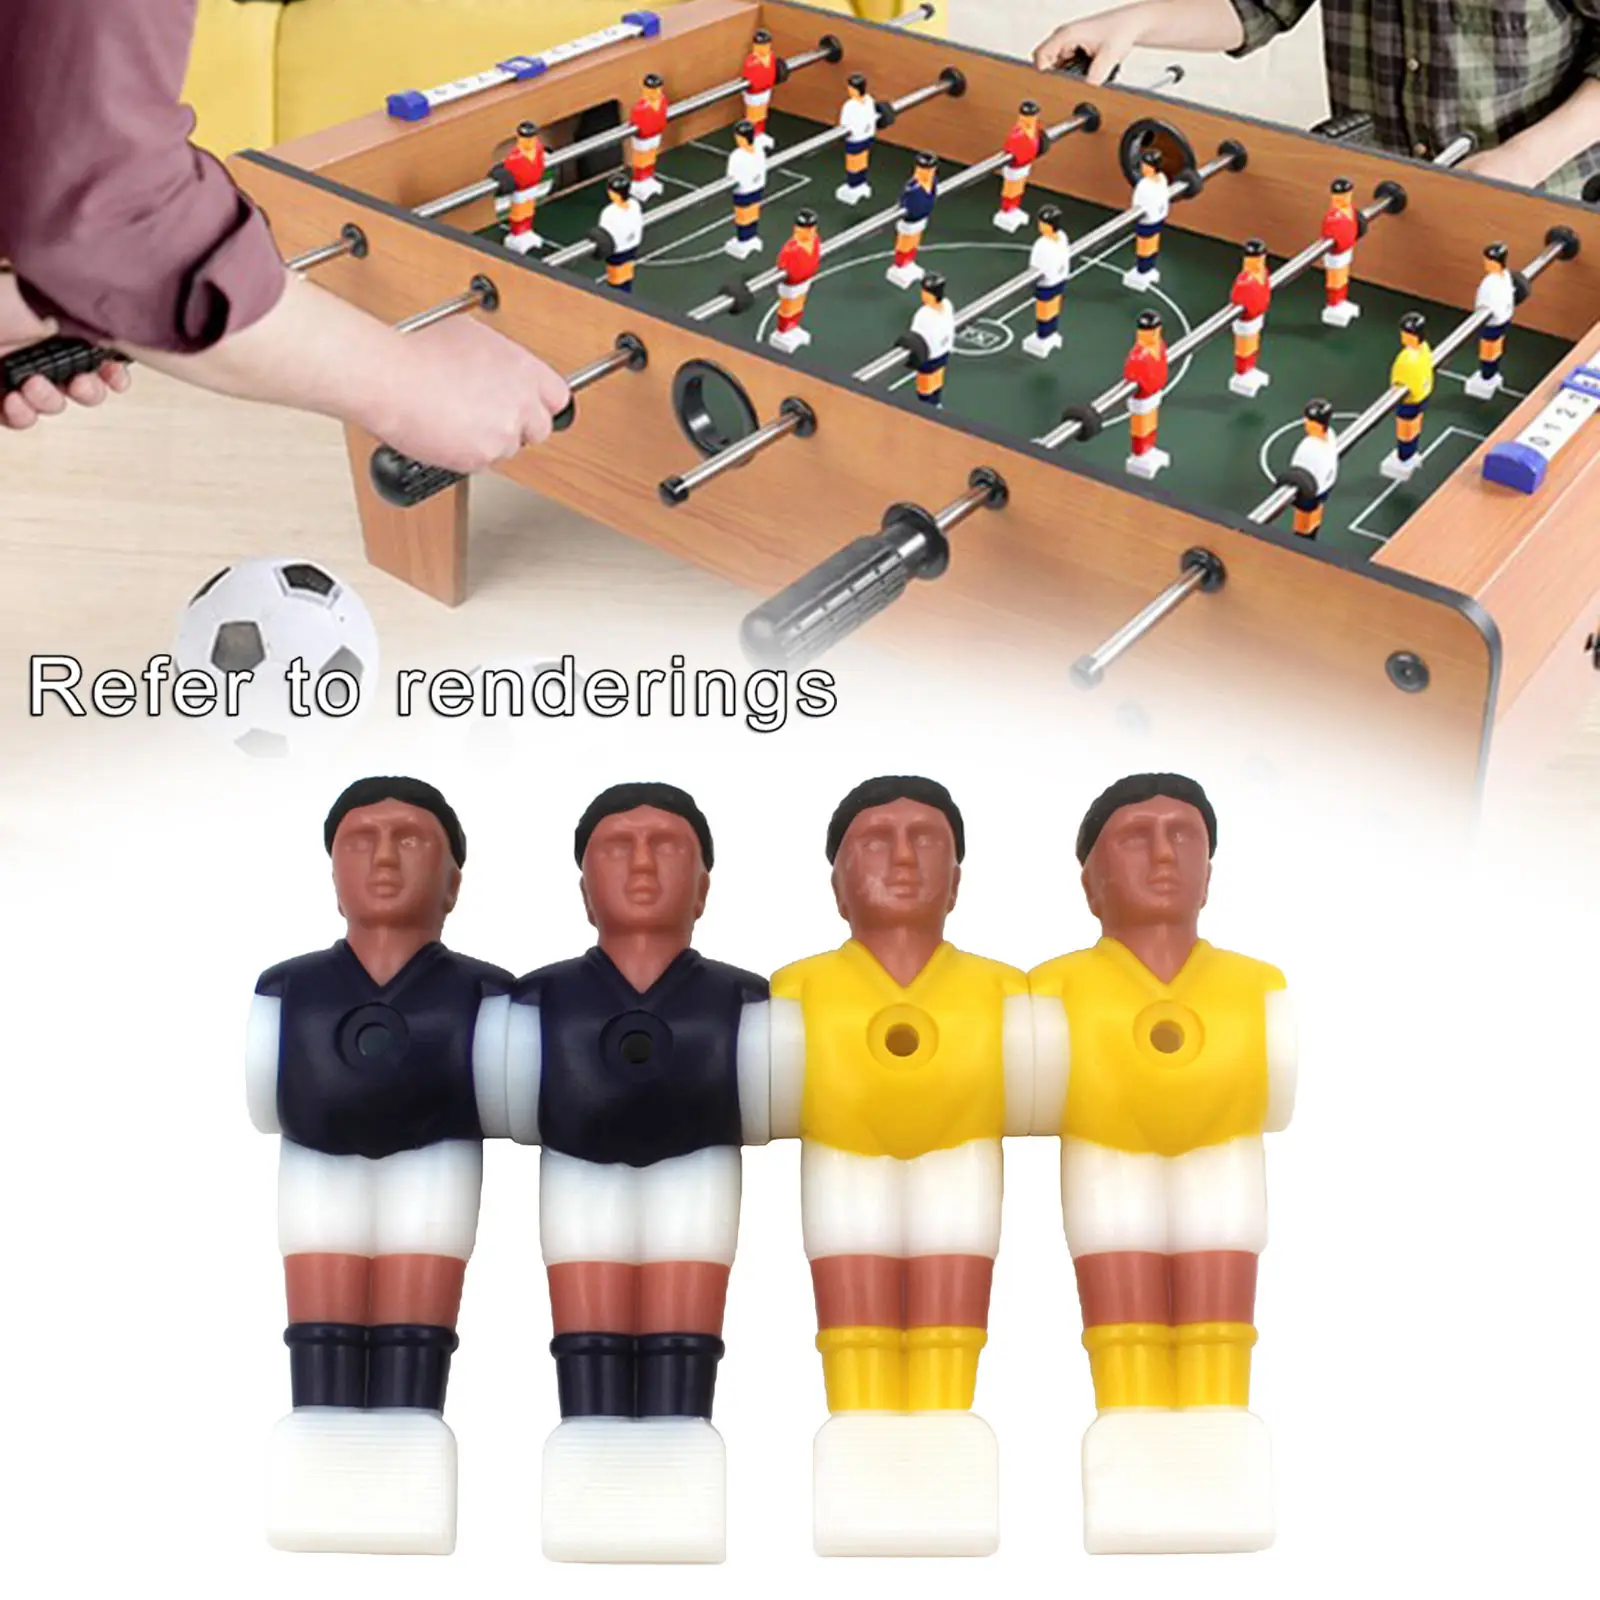 4x Foosball Men Soccer Table Guys Football Accessory 2 yellow 2 purple Soccer Player Man Replacements Set Table Parts